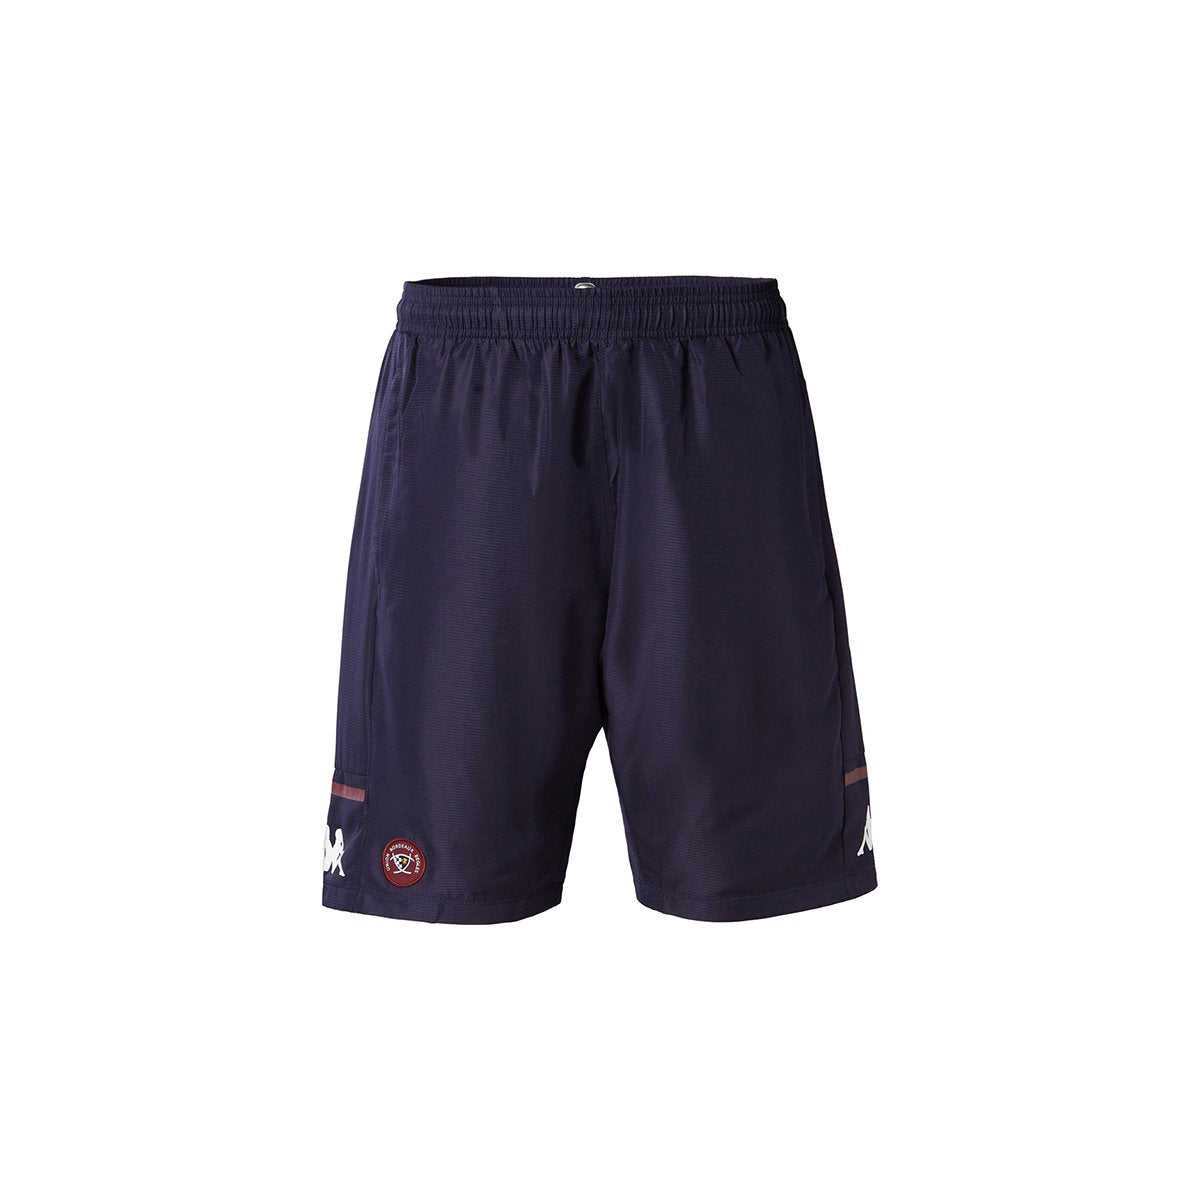 Short Alberg Pro 4 Ubb Rugby Homme - image 1